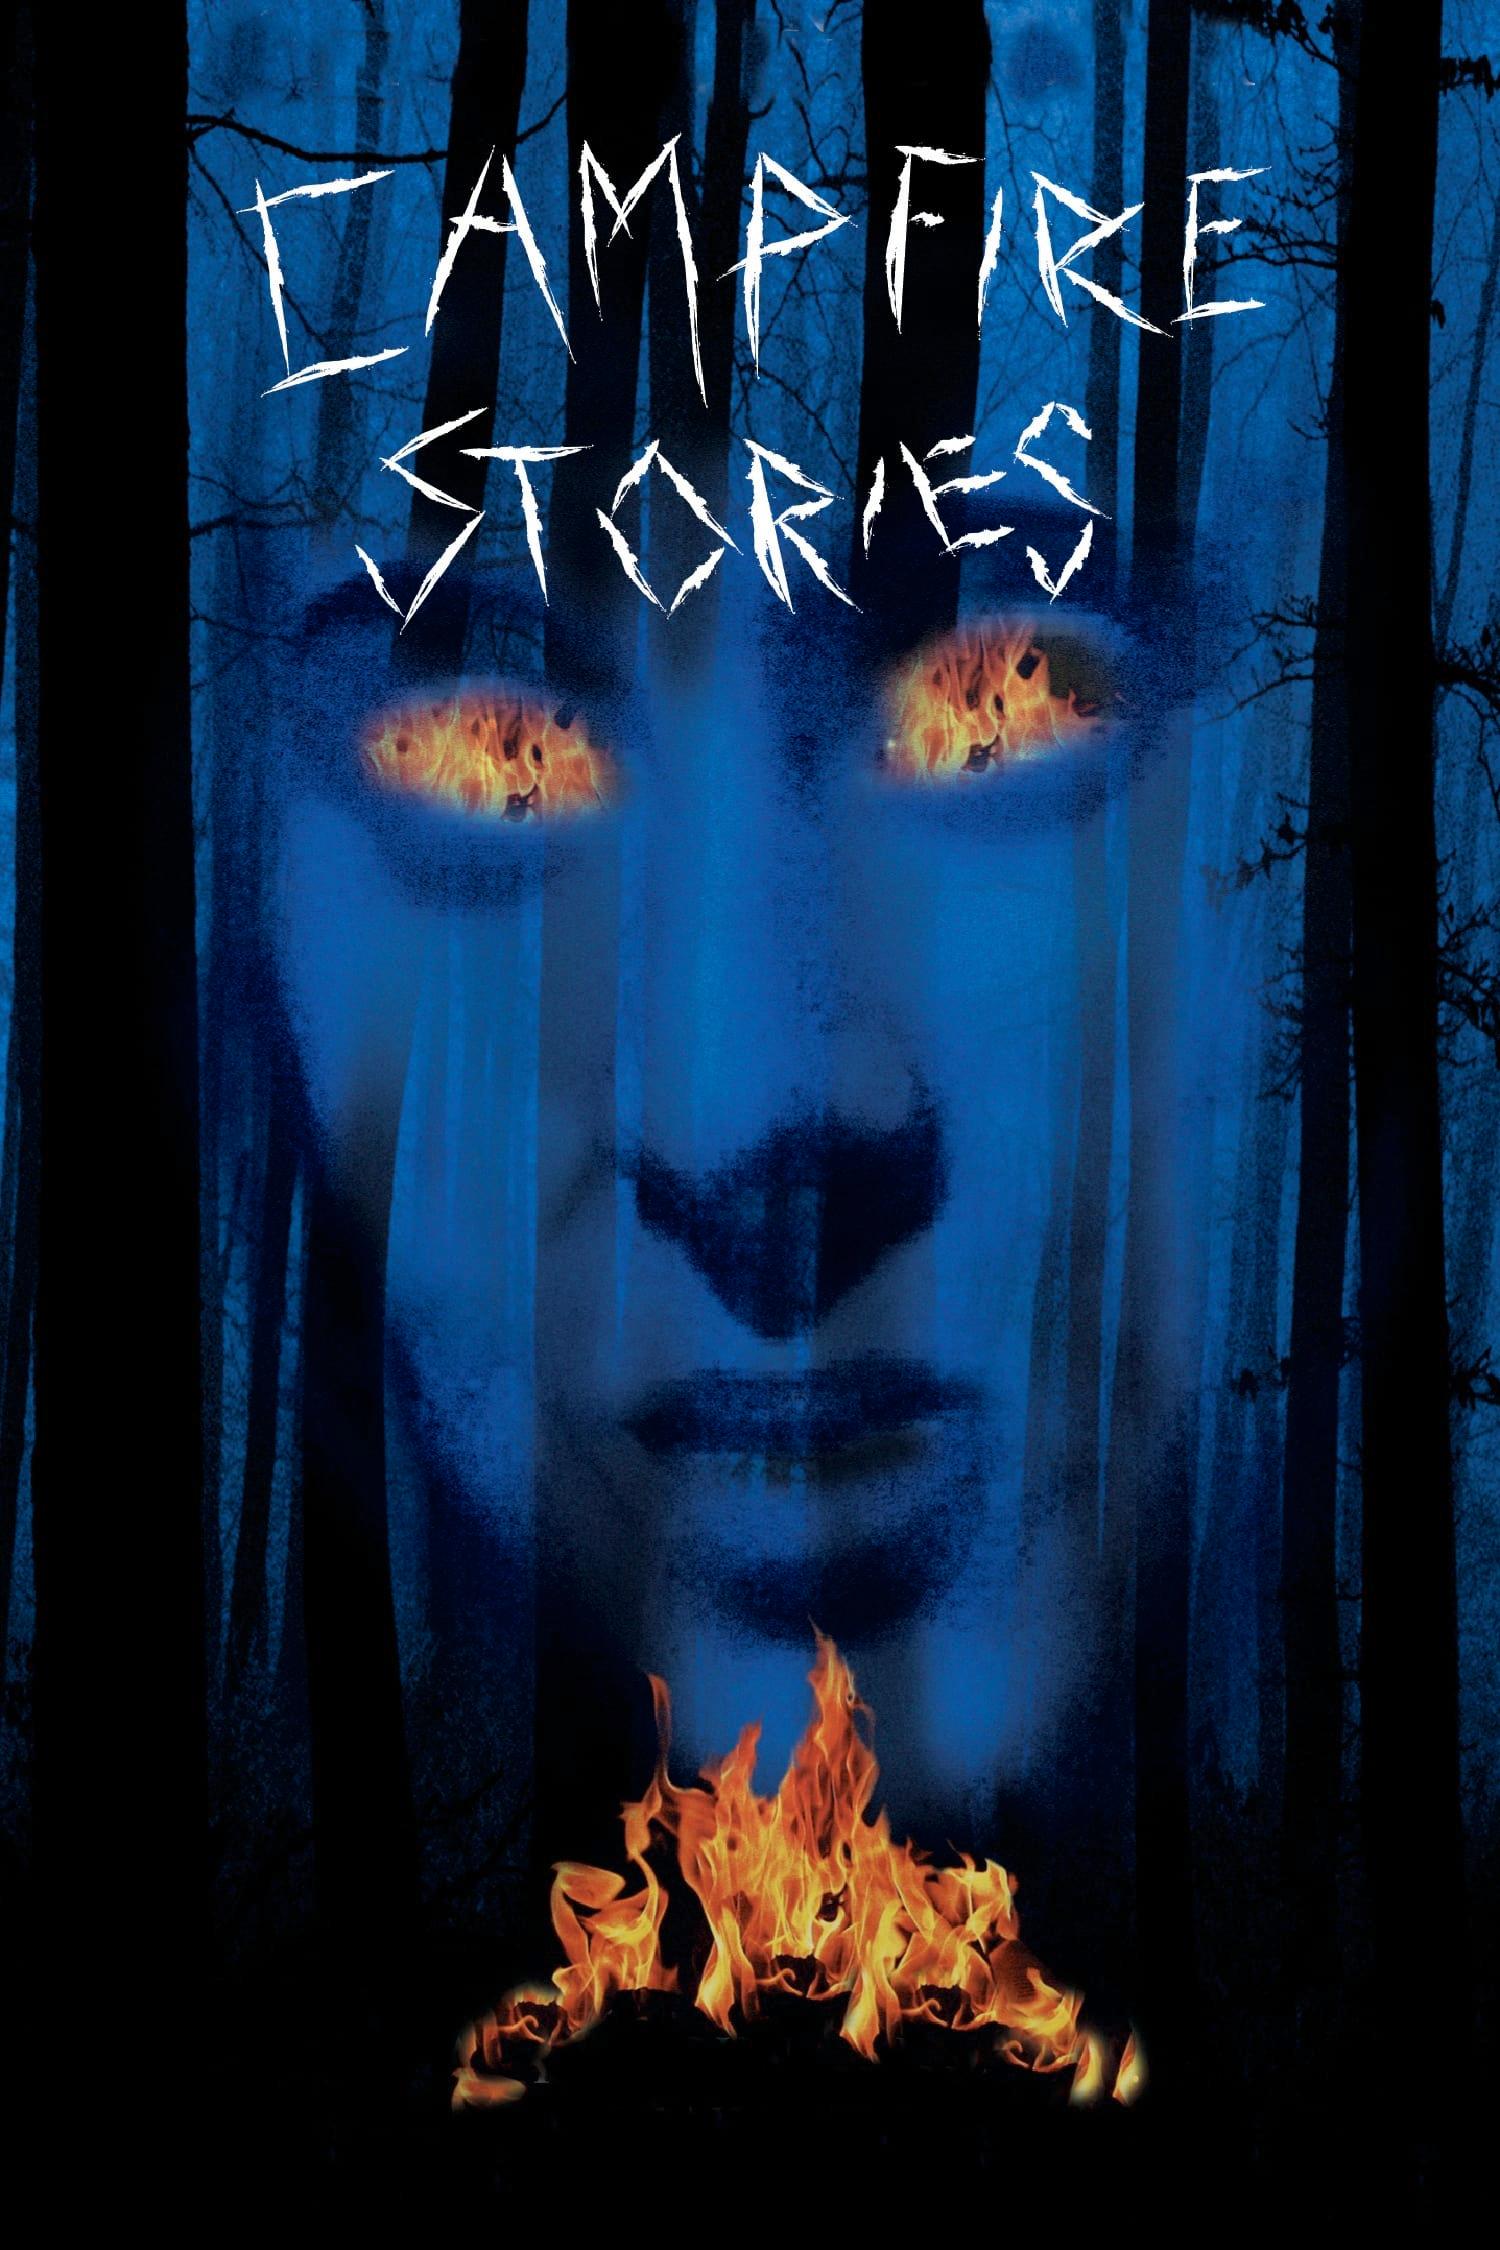 Campfire Stories poster